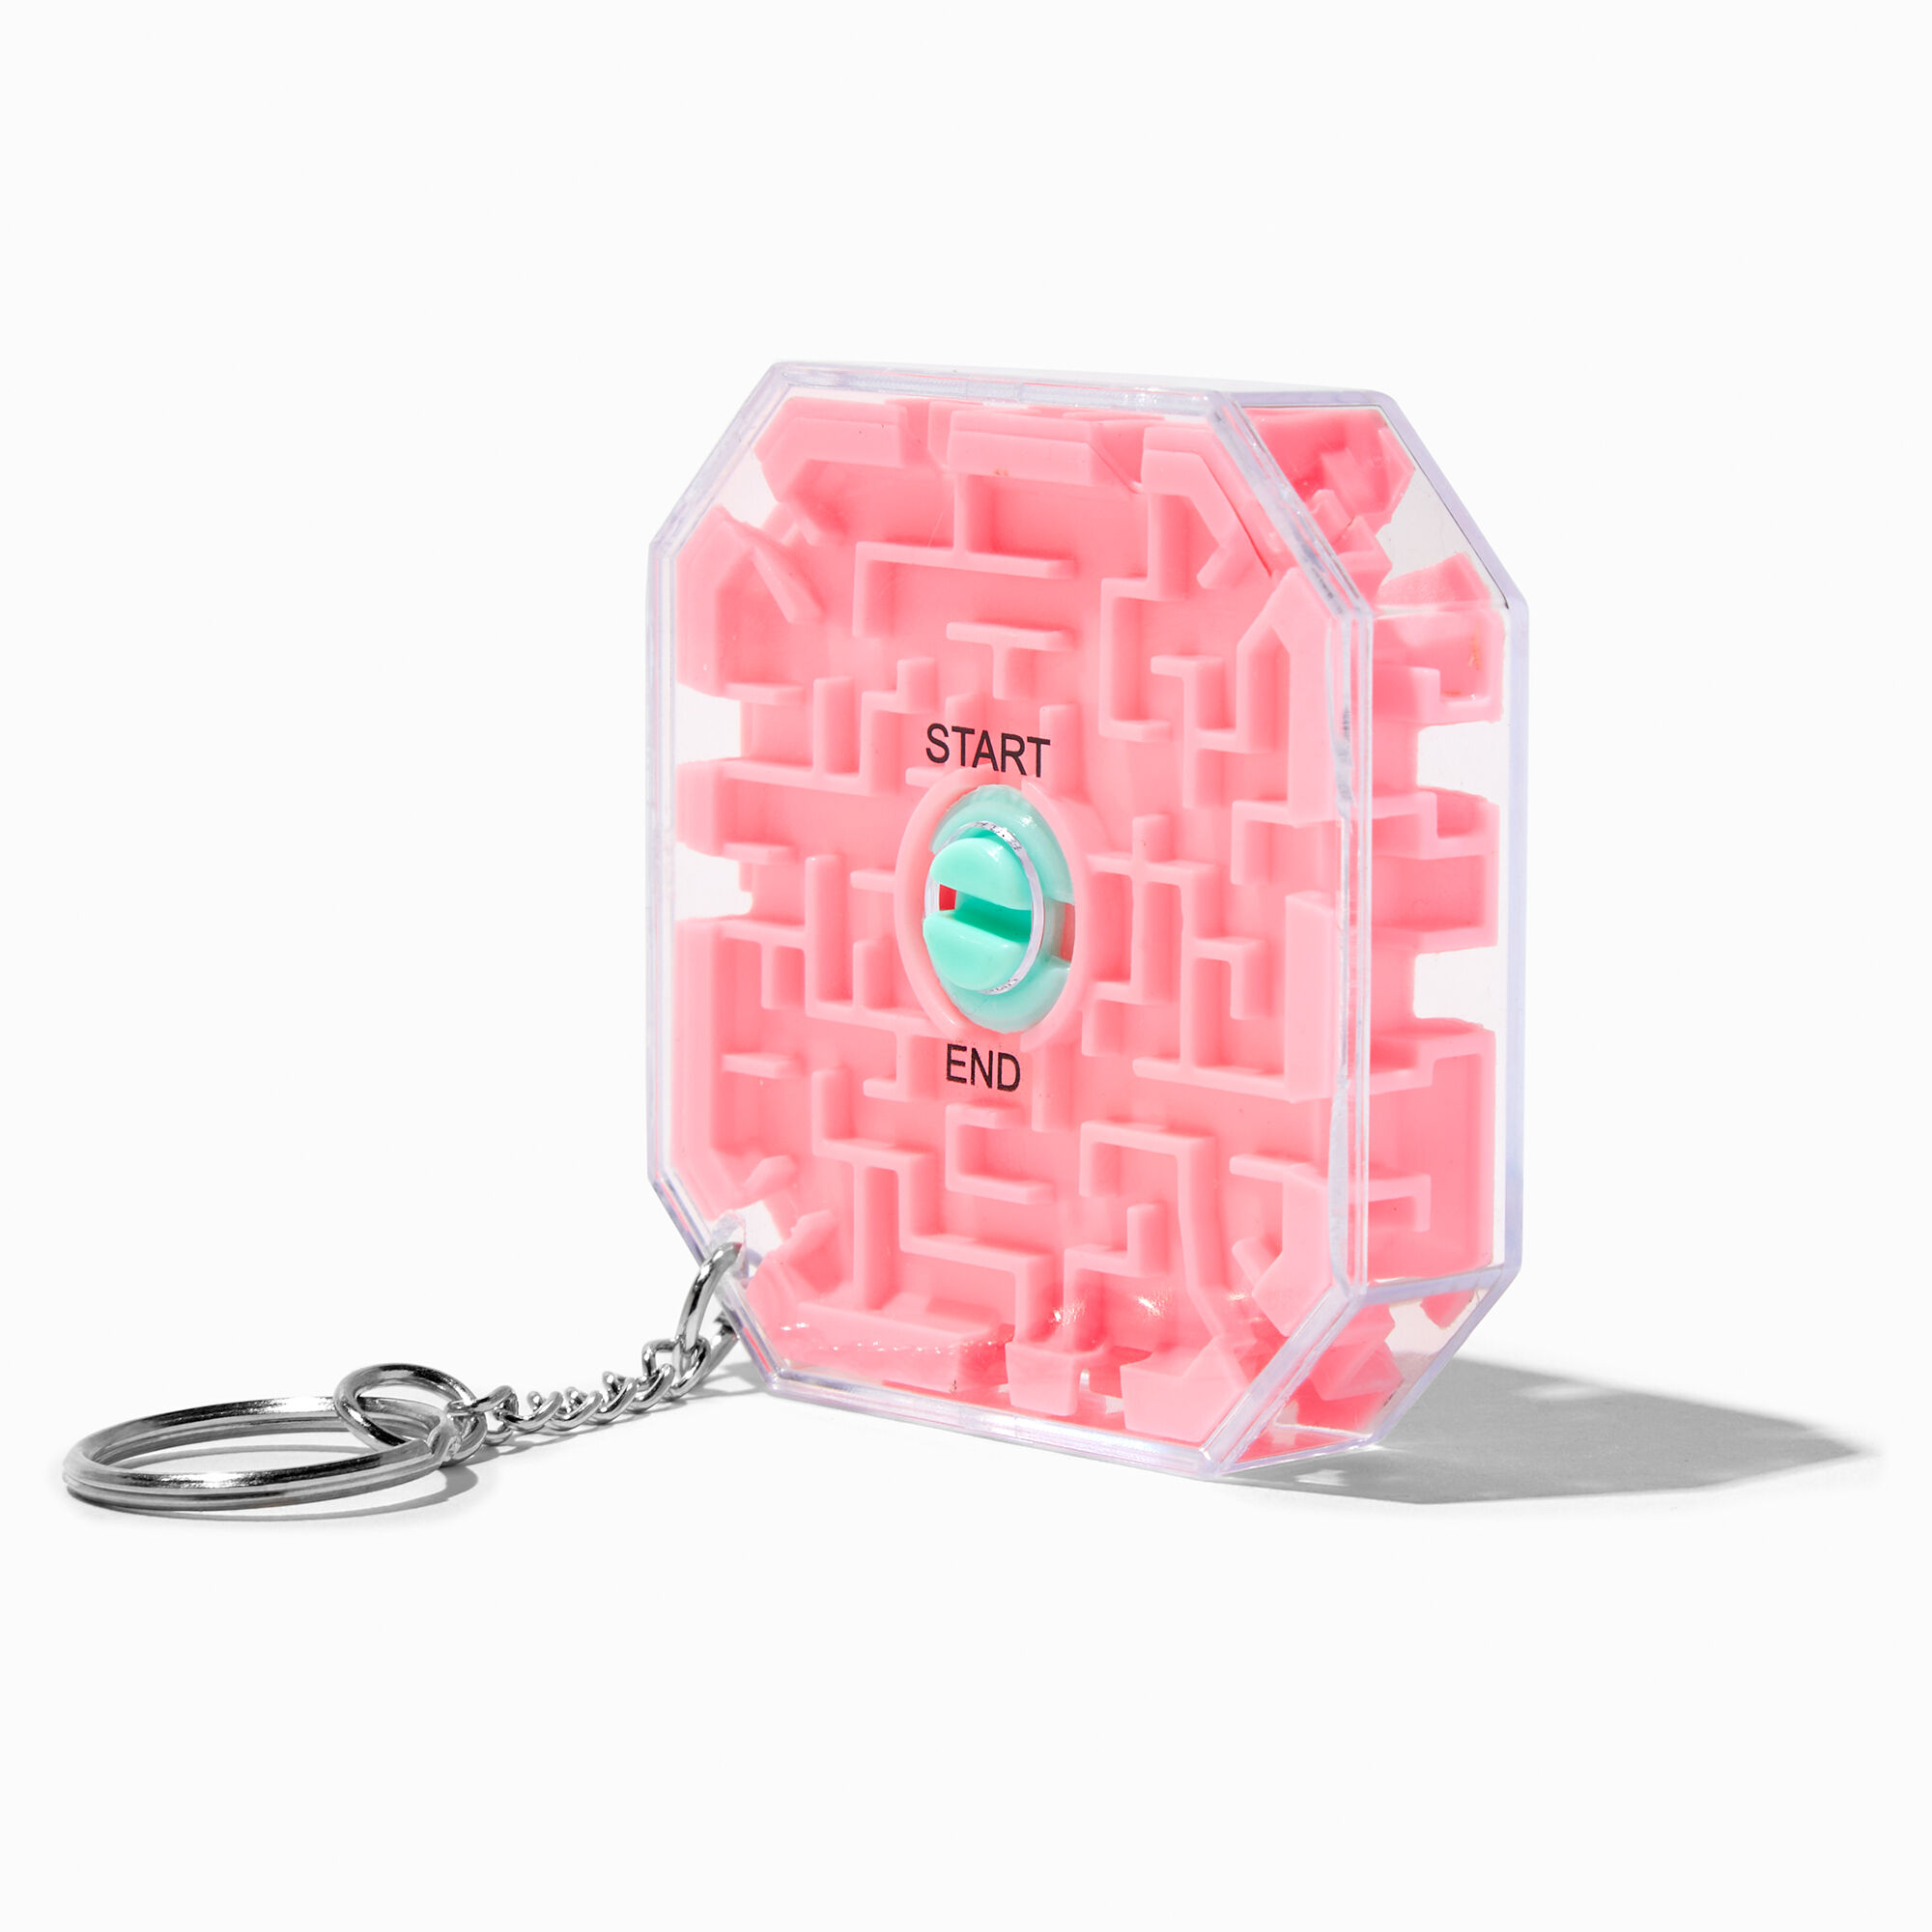 View Claires Maze Game Keychain Pink information